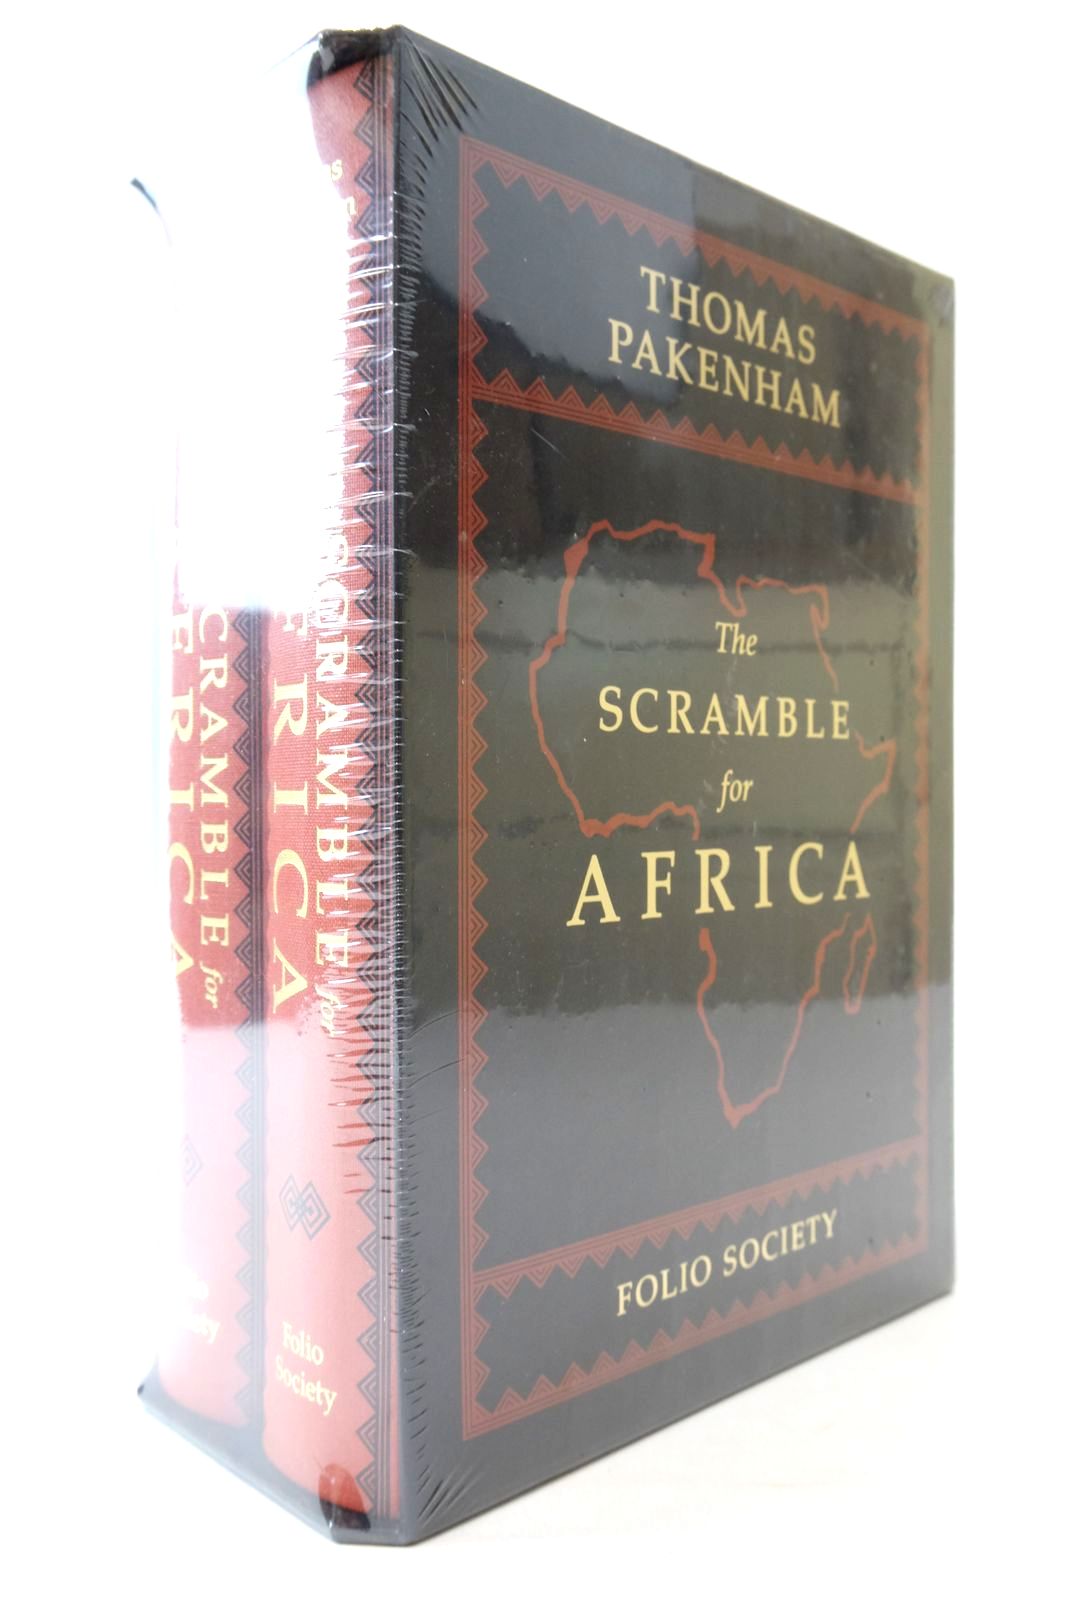 Photo of THE SCRAMBLE FOR AFRICA (2 VOLUMES) written by Pakenham, Thomas published by Folio Society (STOCK CODE: 2140855)  for sale by Stella & Rose's Books